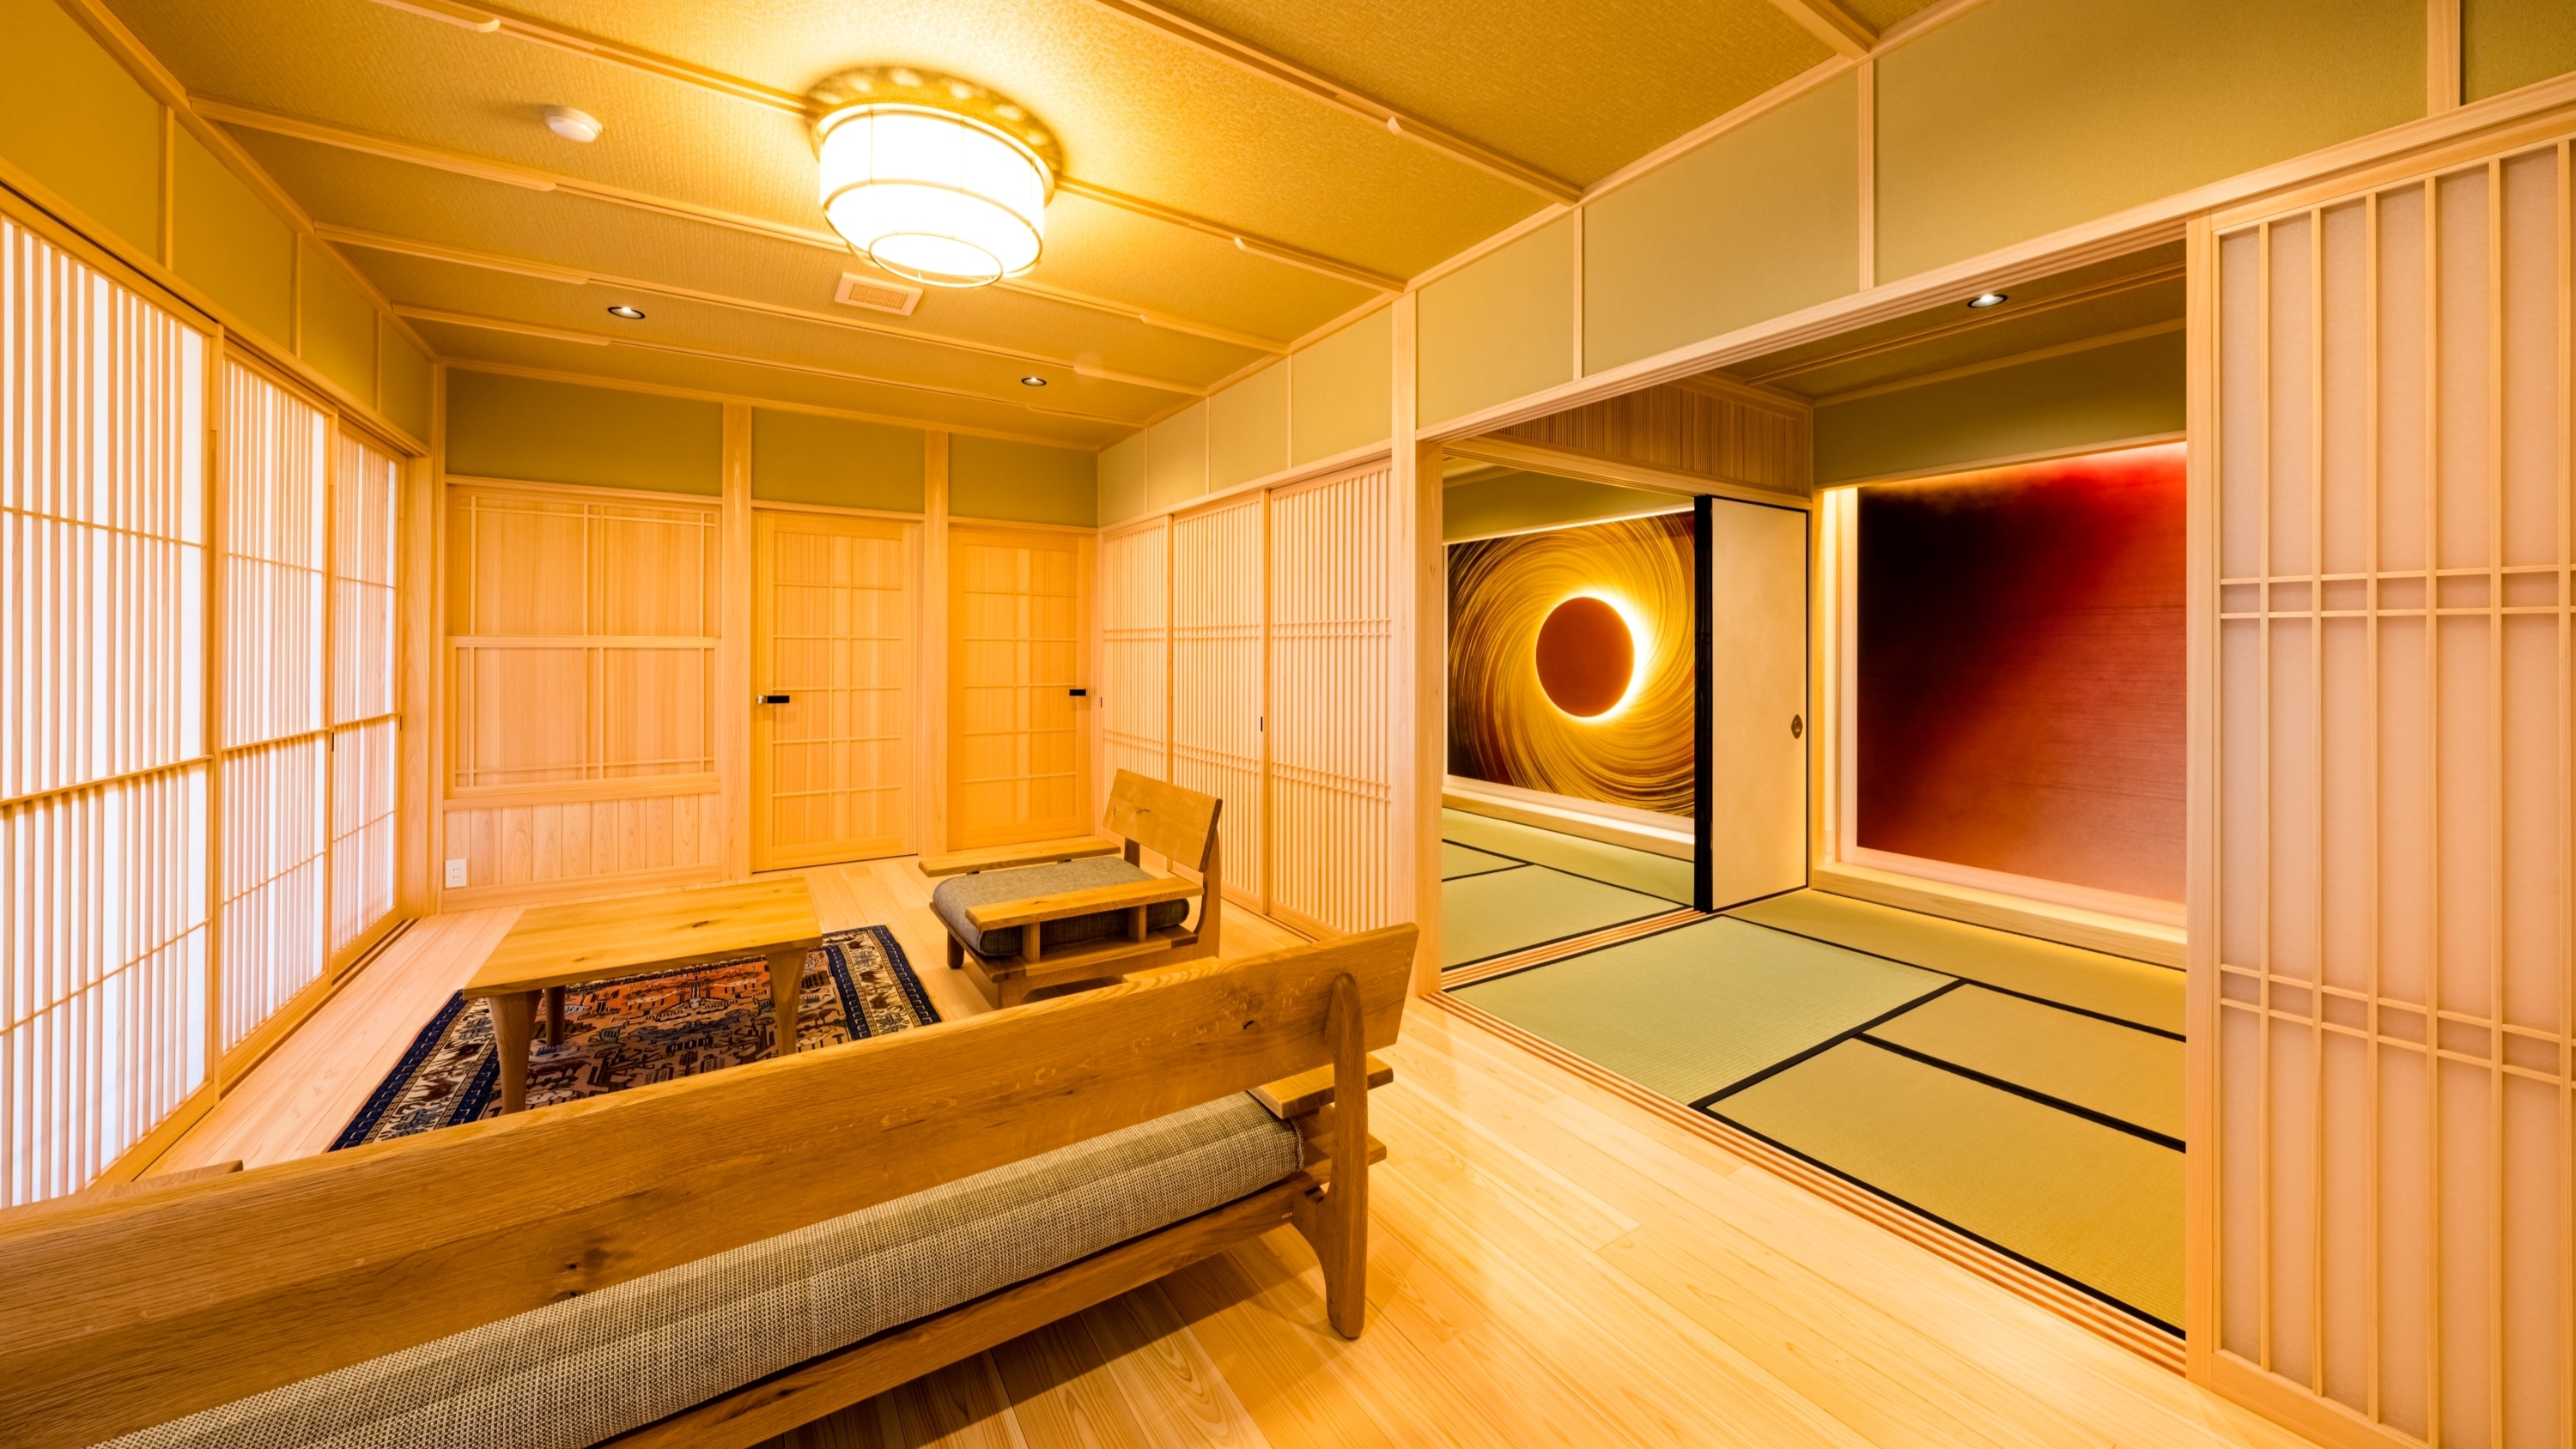 [100 square meters] An example of a luxury suite "Tsukiwa" with a semi-open-air bath